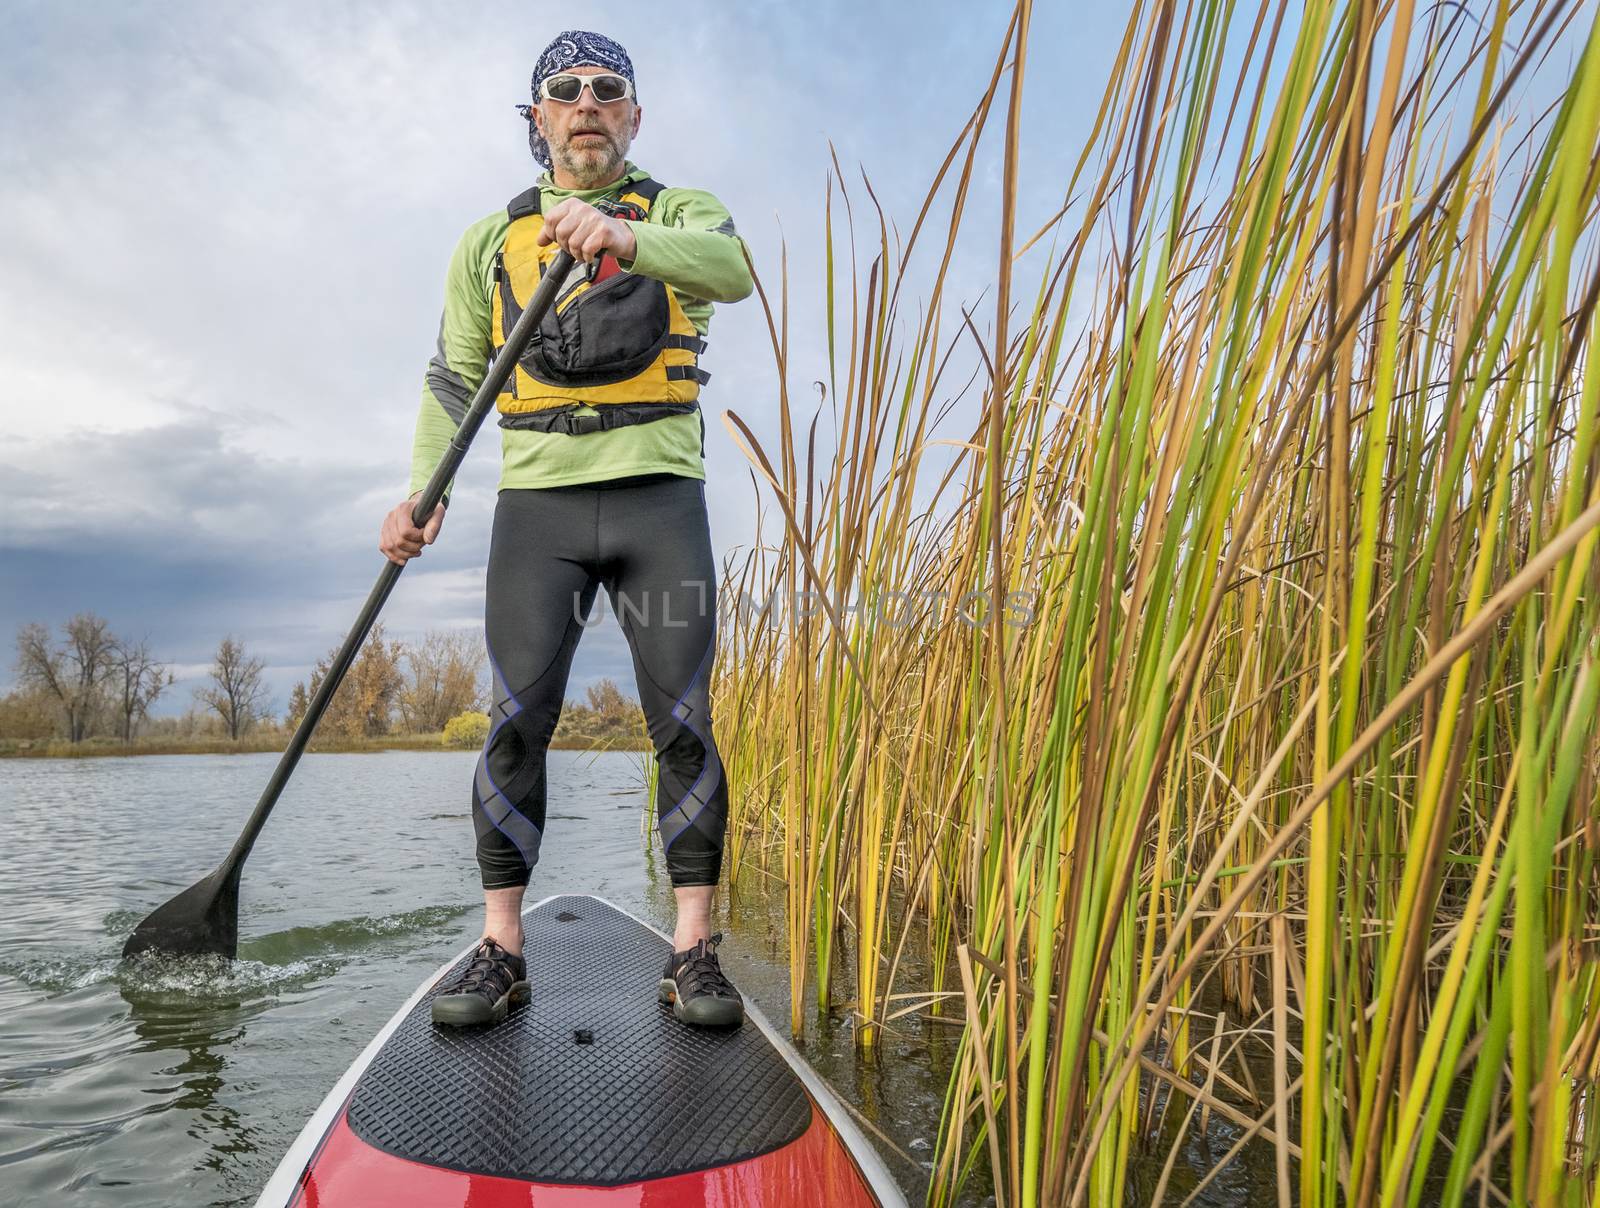 stand up paddling in Colorado by PixelsAway